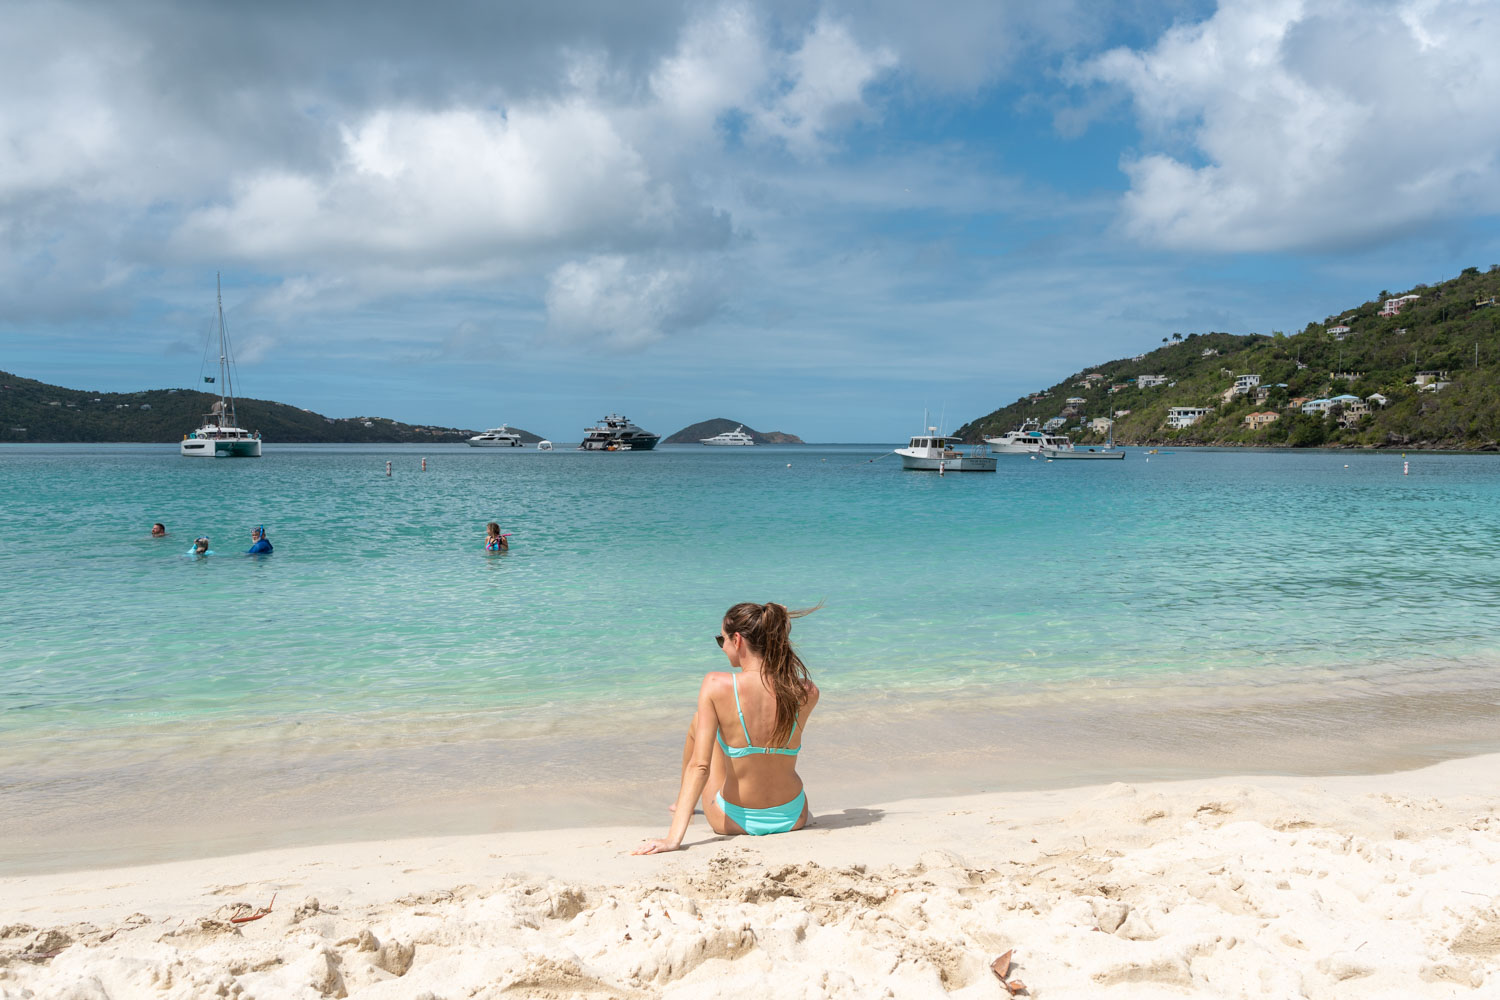 The beach at Magen's Bay is one of the best things to do in St. Thomas.